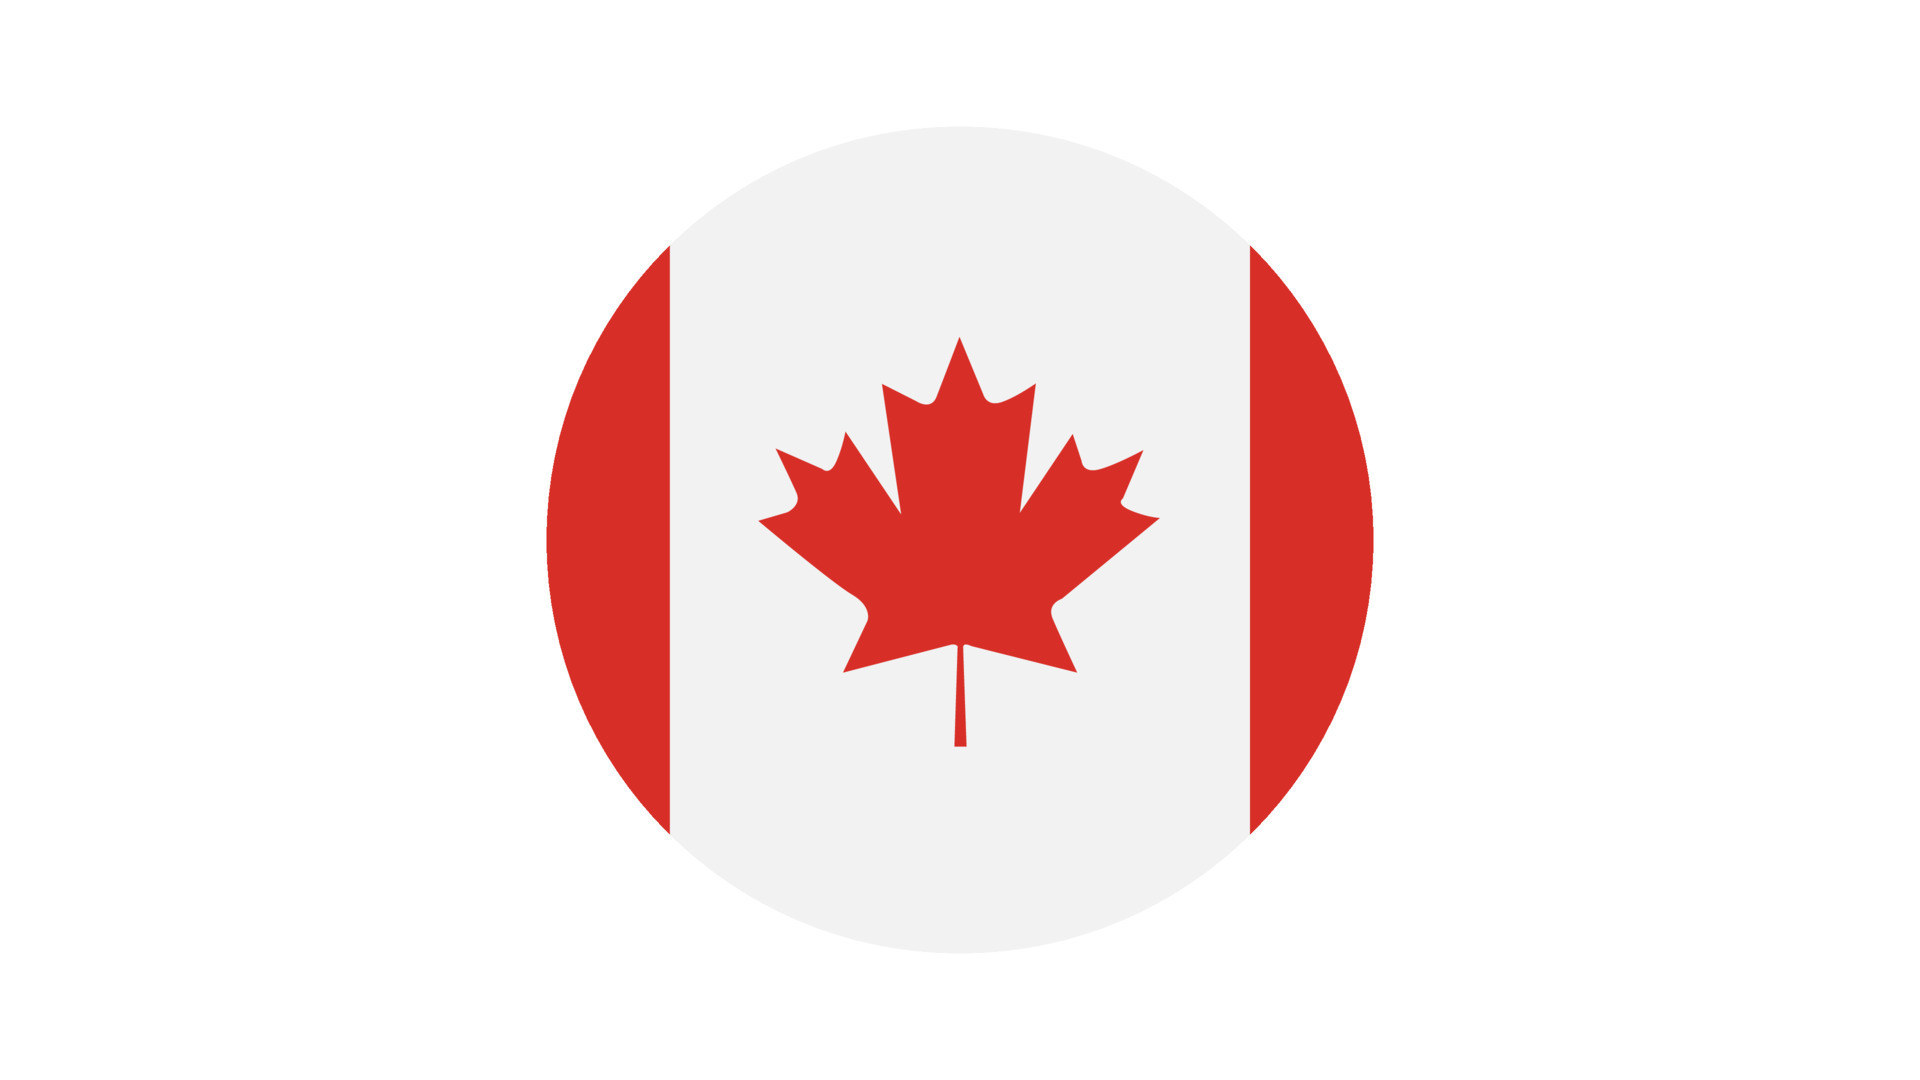 canada-flag-circle-image-and-icon-free-vector Guide to Relocating to Canada with Your Spouse and Children || For International Students and Permanent Residents